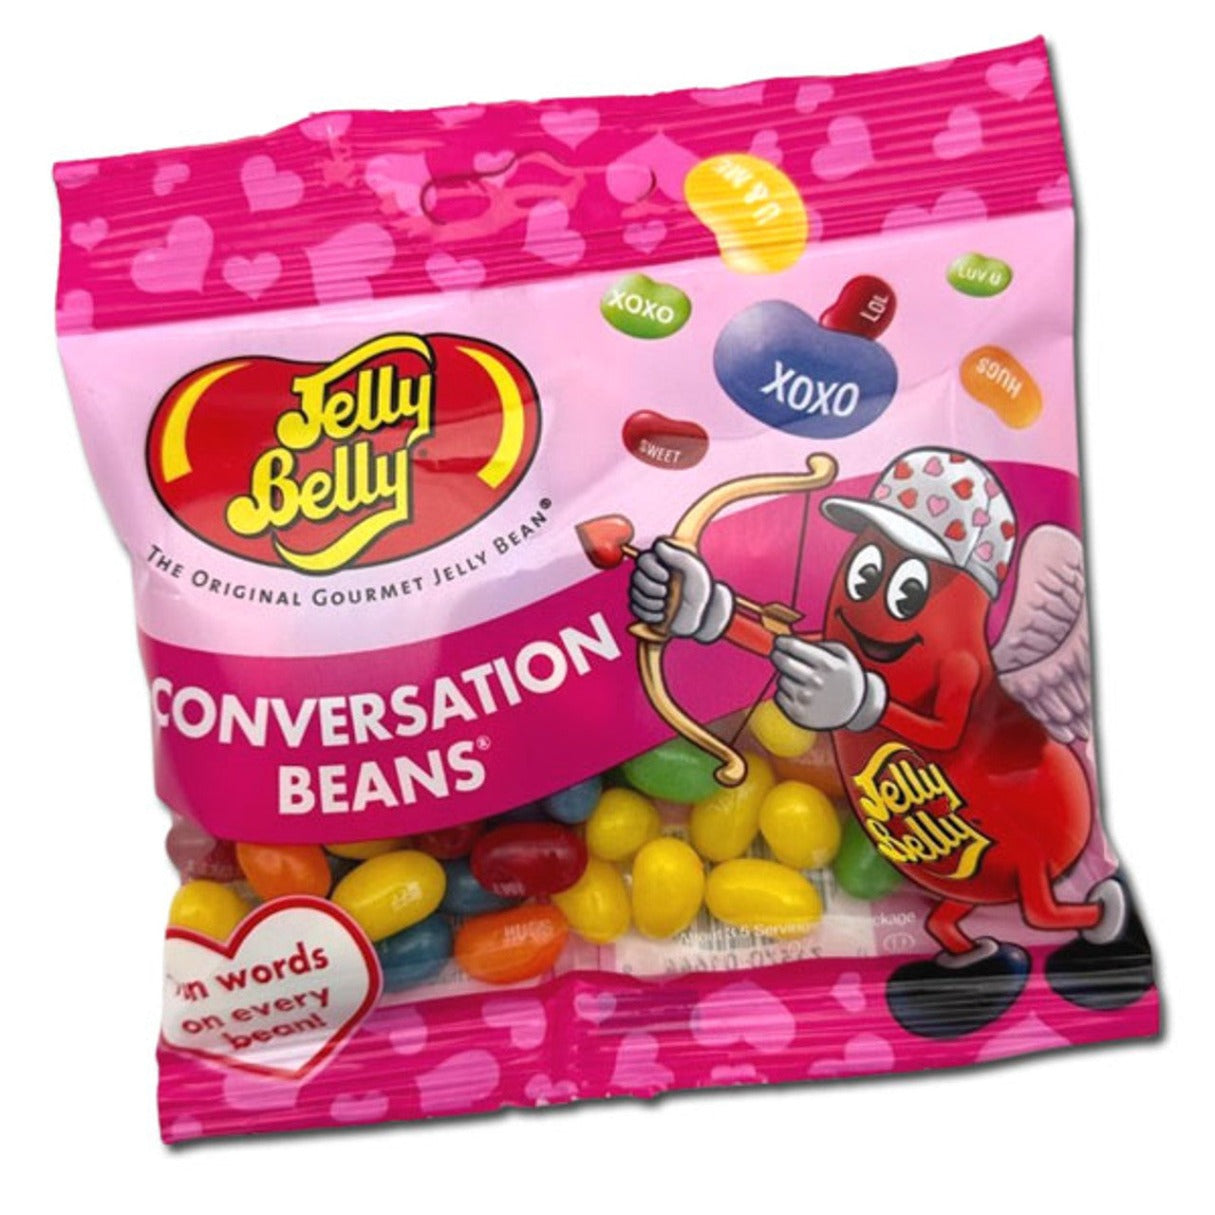 Jelly Belly Conversation Beans 3.5oz - 12ct